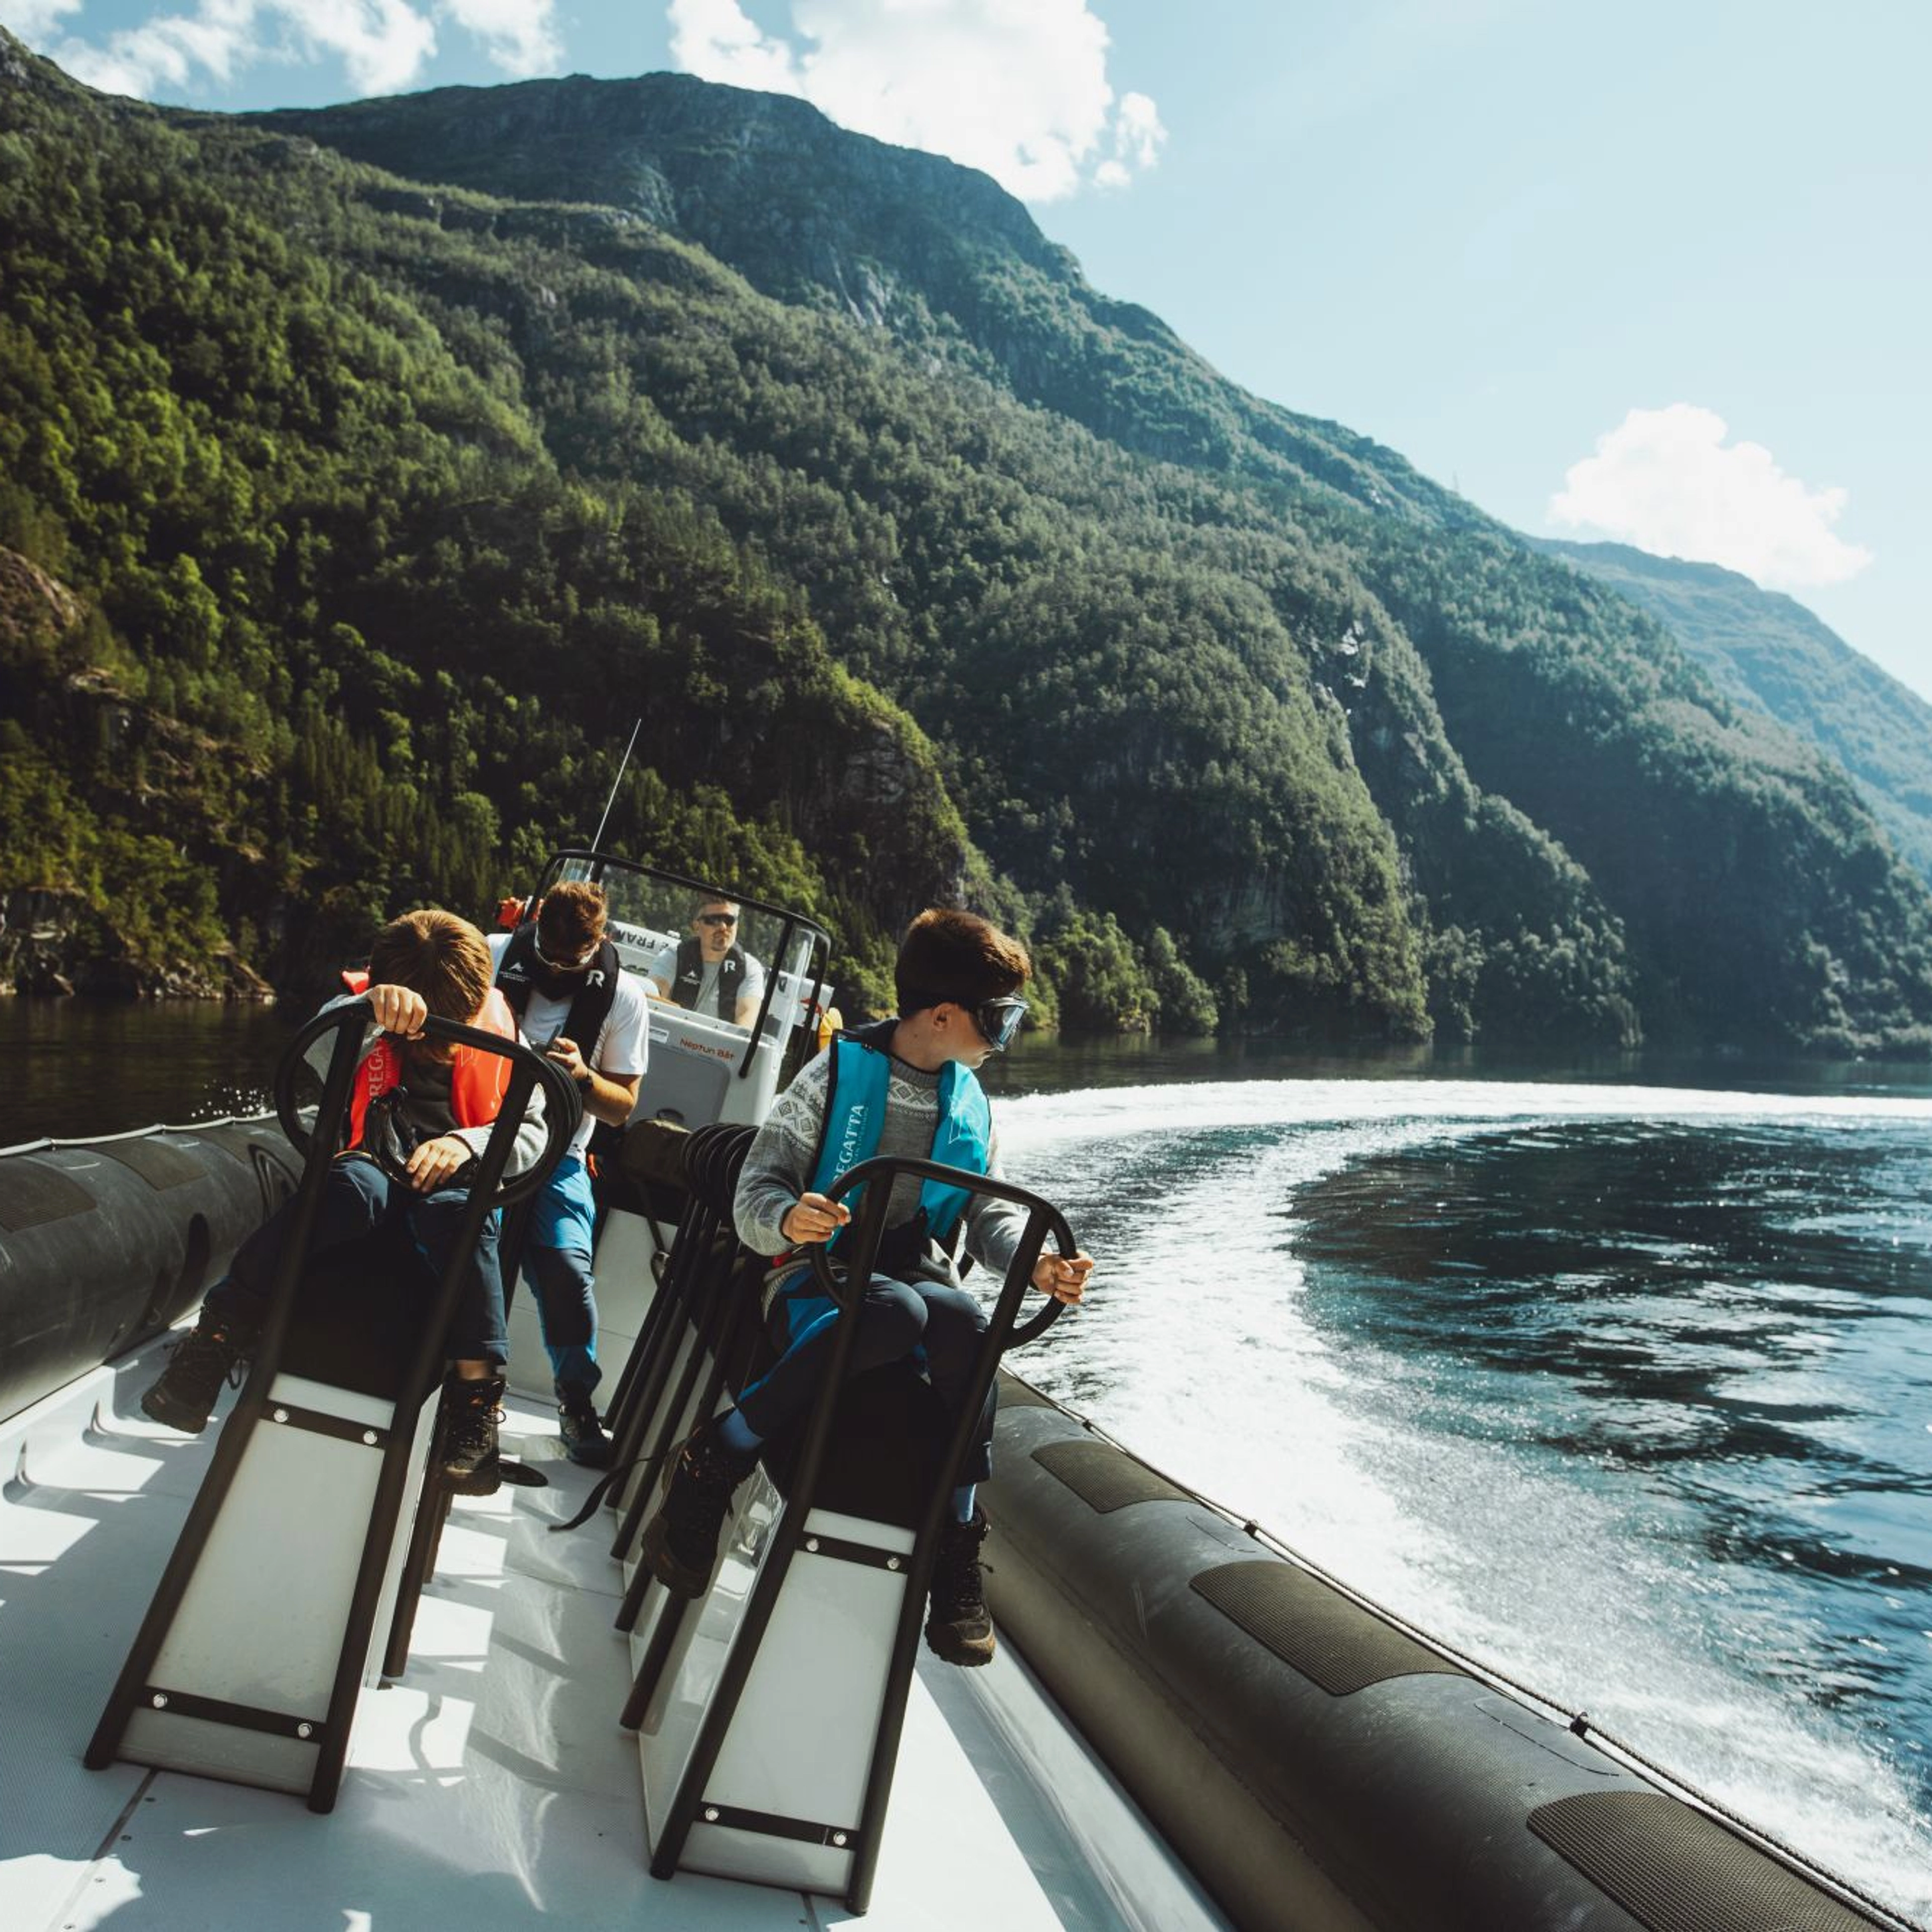 Fast-paced RIB boat trip on the Hardangerfjord from Ulvik, Hardanger, Norway